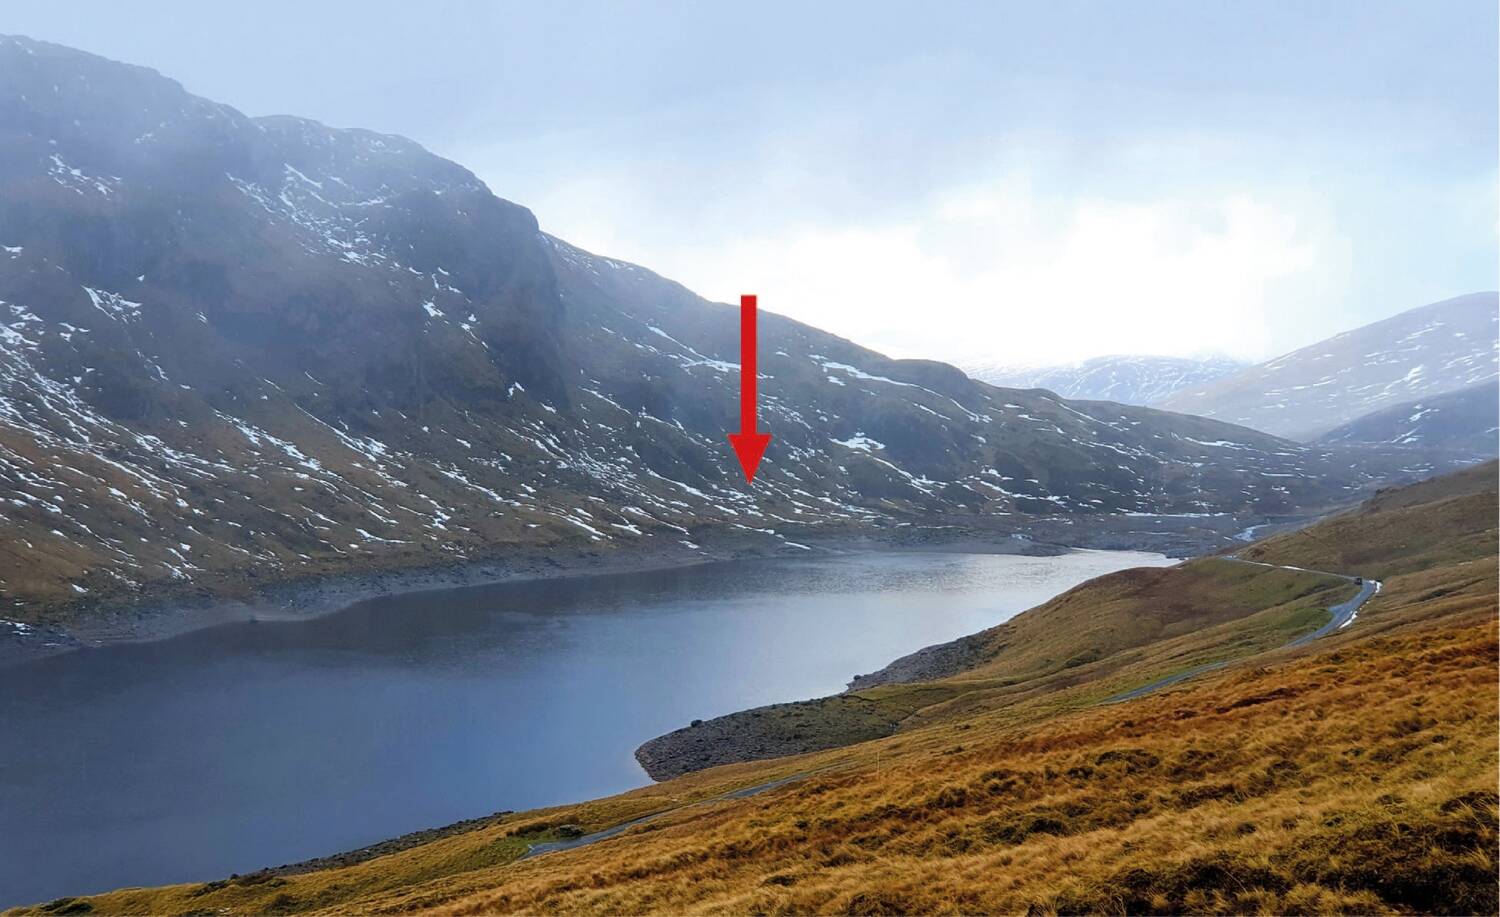 A view looking across a loch from a hillside to another steep hillside. An area on the far side of the loch has been marked by a super-imposed large red arrow.